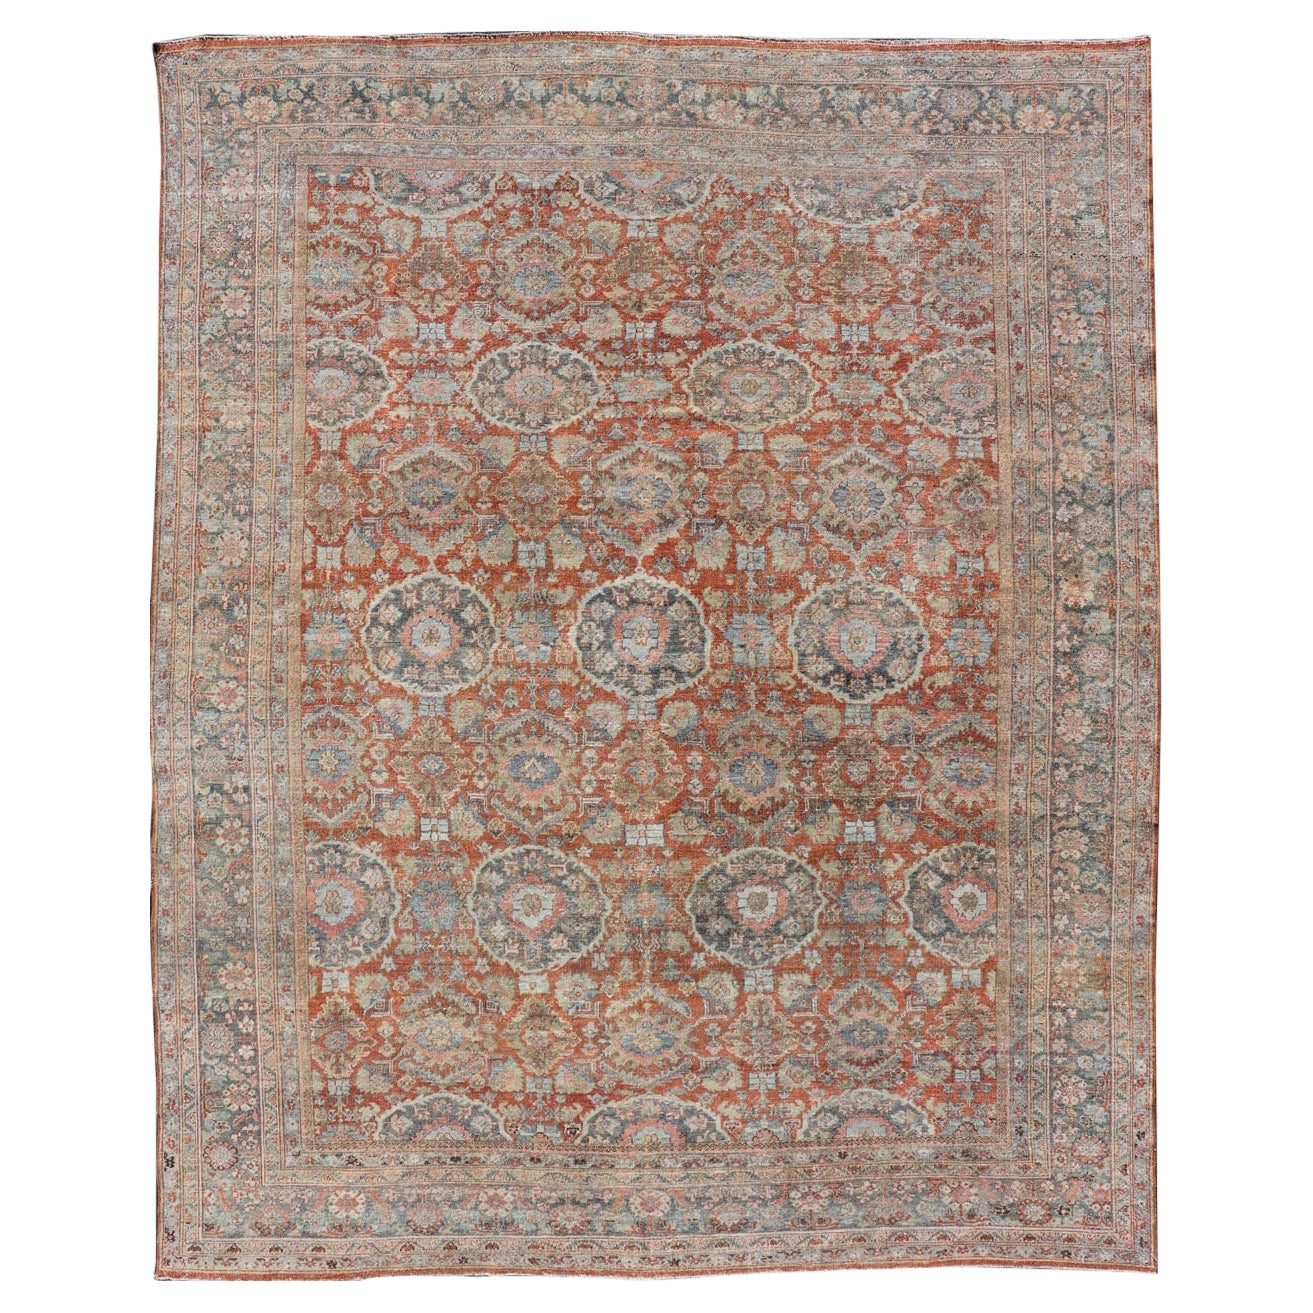 Antique Persian Colorful Sultanabad Mahal Rug with All Over Floral Design For Sale